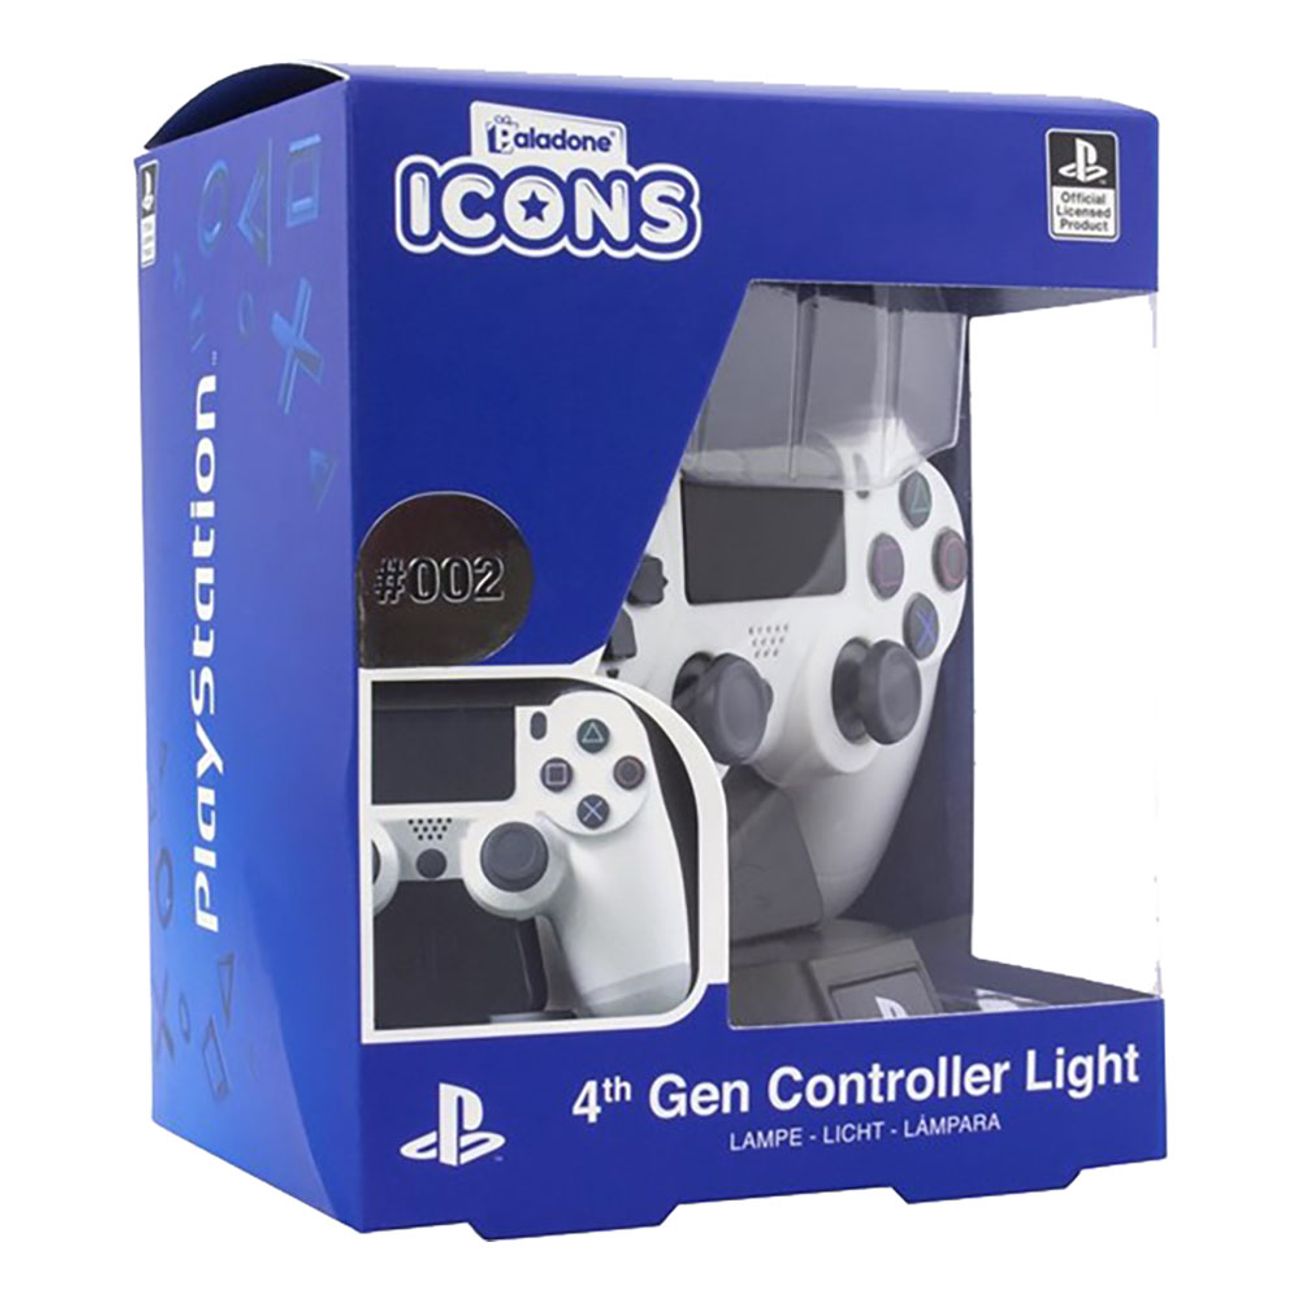 playstation-4th-gen-controller-icon-light-bdp-77415-2